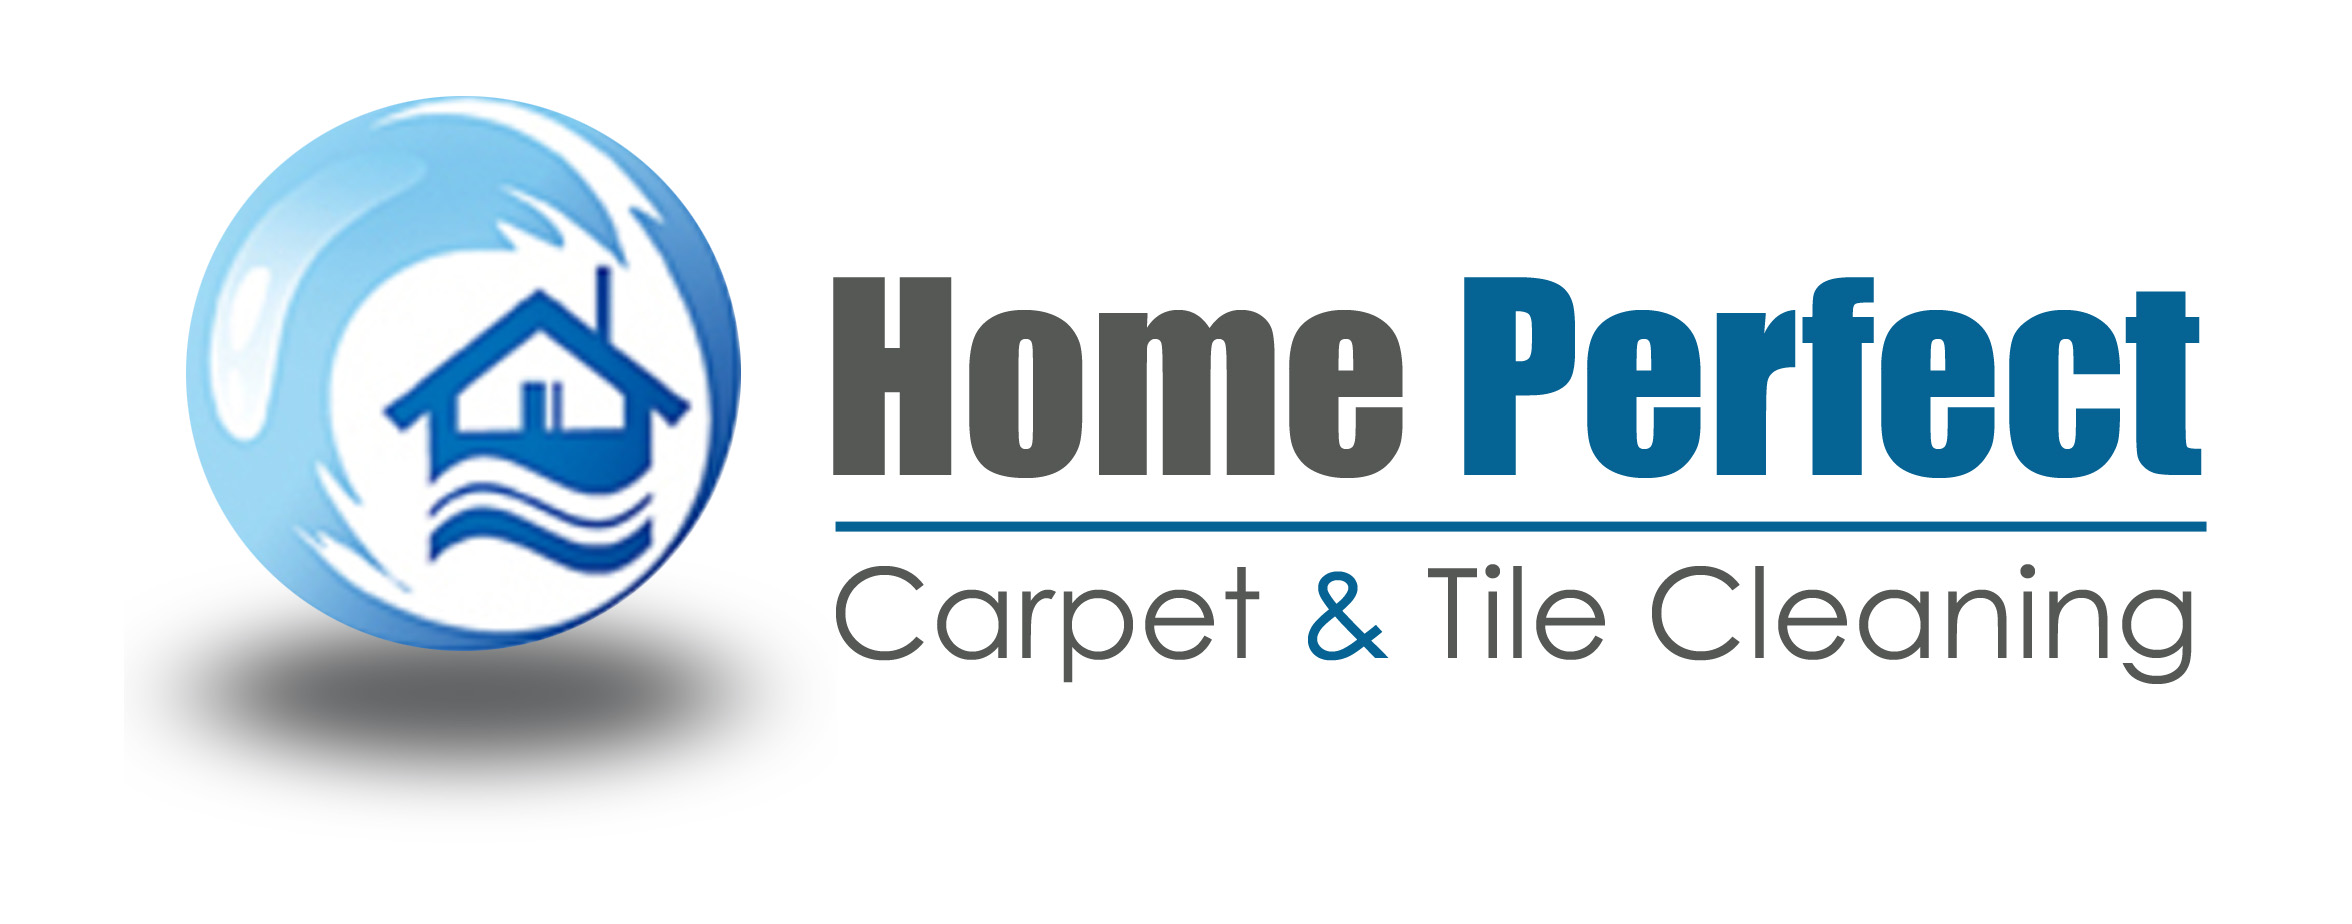 Why You May Not Want to Hire a Cheap Carpet Cleaner